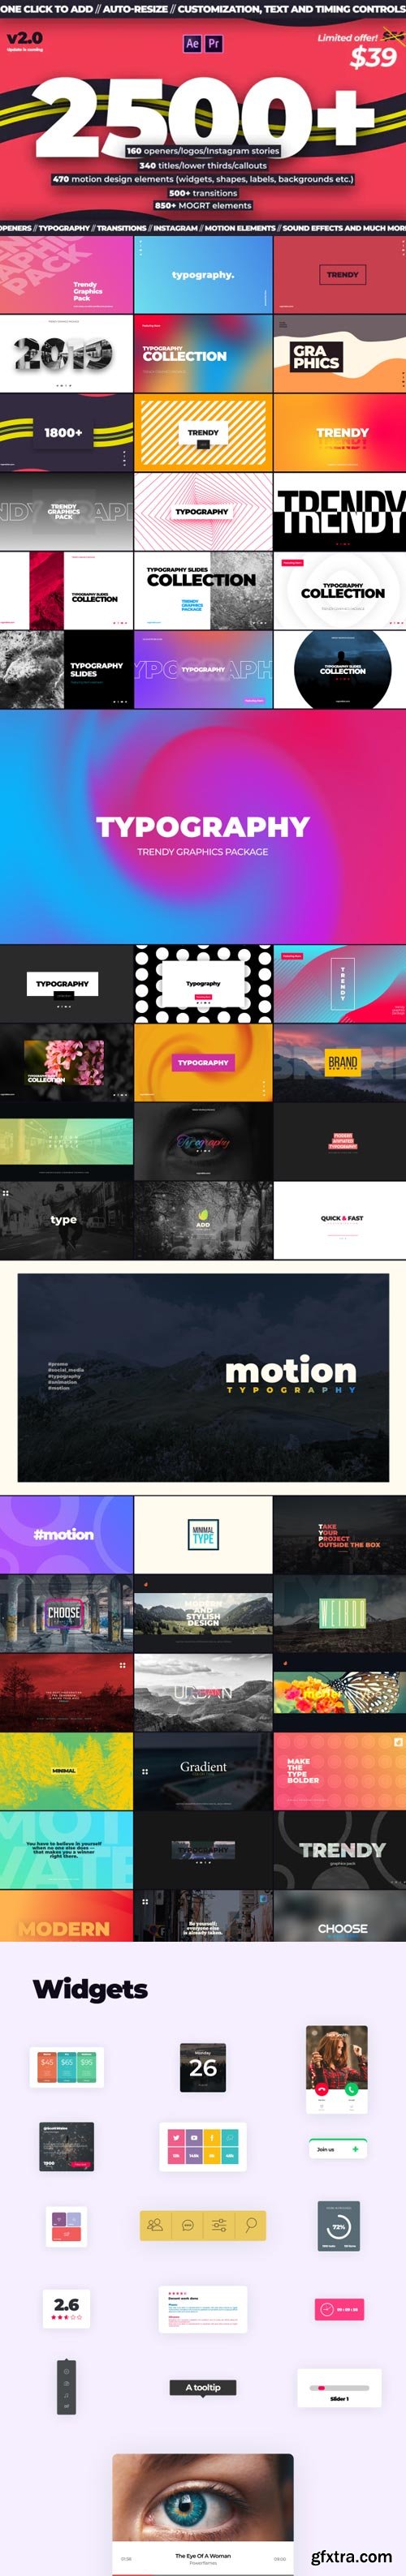 Videohive - Trendy Motion Graphics Package V.2.1 - 24321544